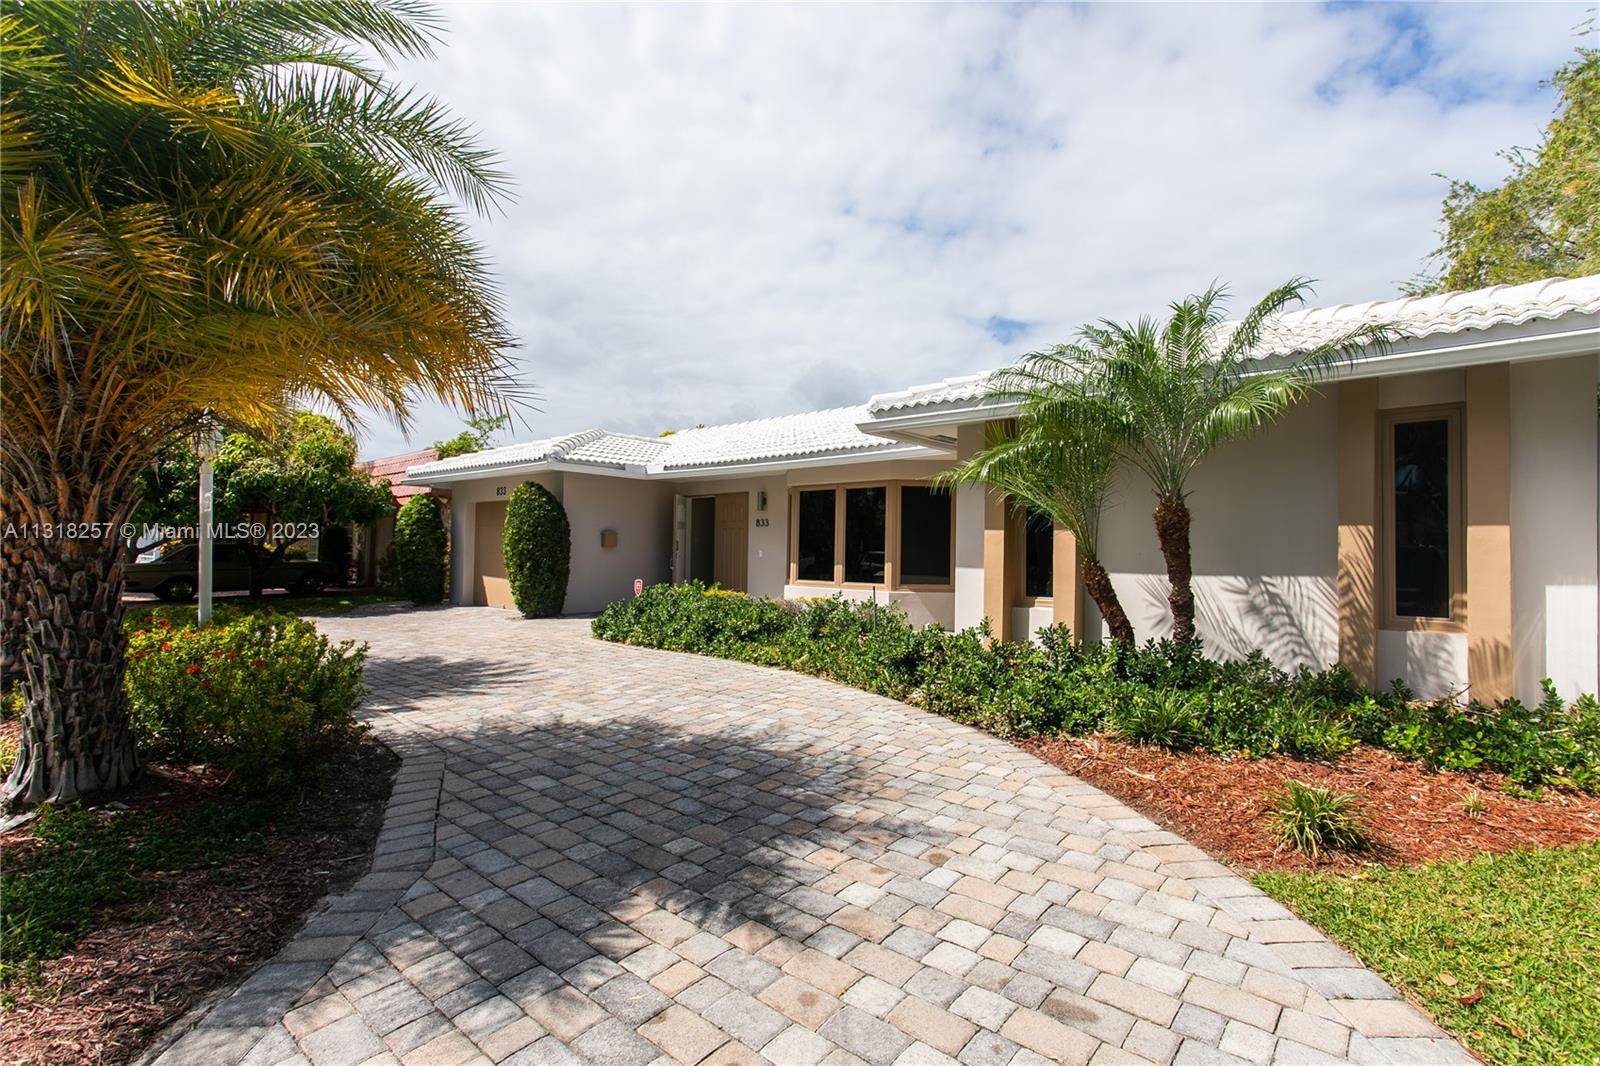 This is a short term Monthly Weekly Rental Monthly rate 12, 999 Call agent for a Weekly Price Fully Renovated, Luxury 5BR 3BA House with the New Heated Pool.